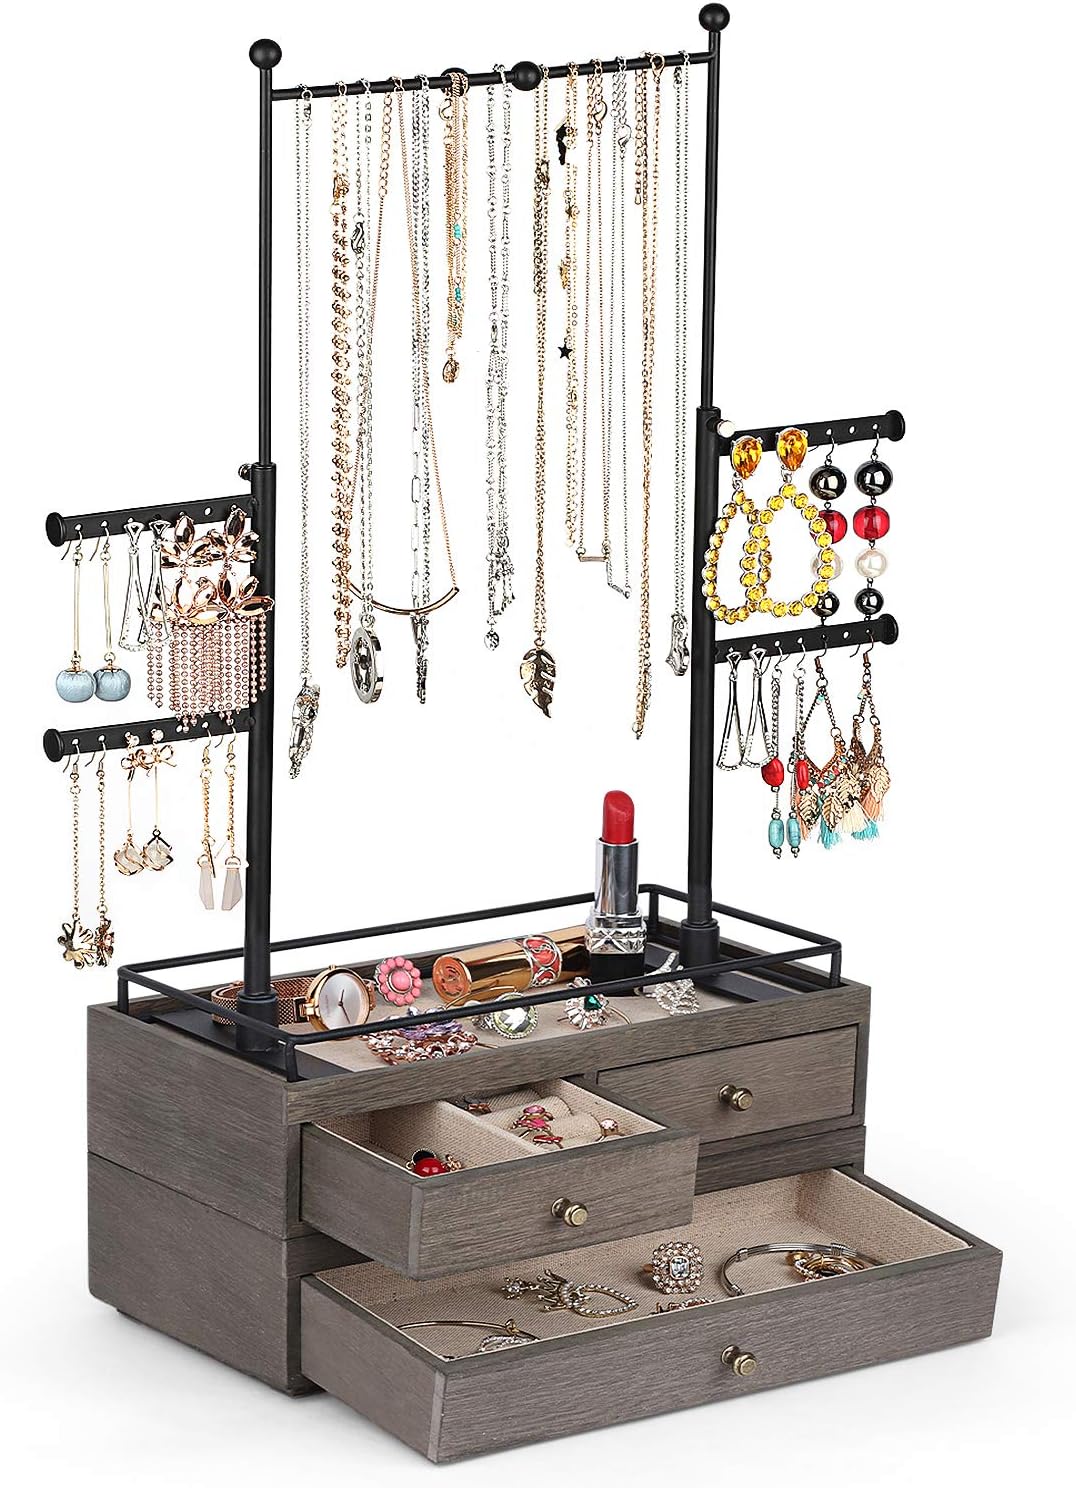 Jewelry Organizer - 2 Layer Wooden Jewelry Drawer Storage Box with 6 Tier Jewelry Tree Stand, Jewelry Display for Necklaces Bracelet Earring Ring (Carbonized Black)